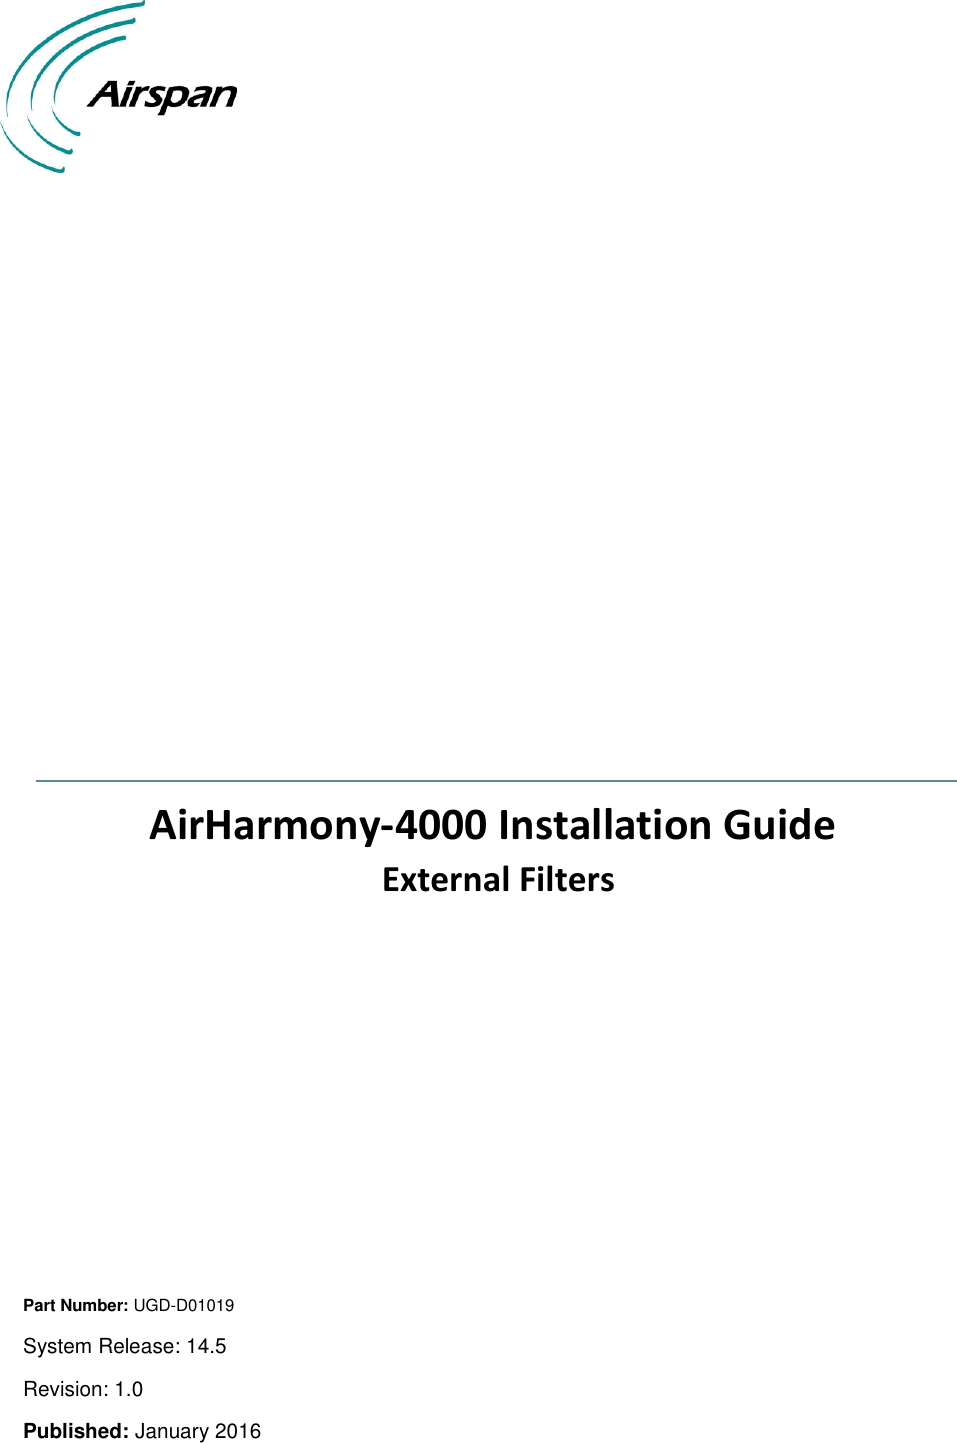                     AirHarmony-4000 Installation Guide  External Filters         Part Number: UGD-D01019 System Release: 14.5 Revision: 1.0 Published: January 2016 